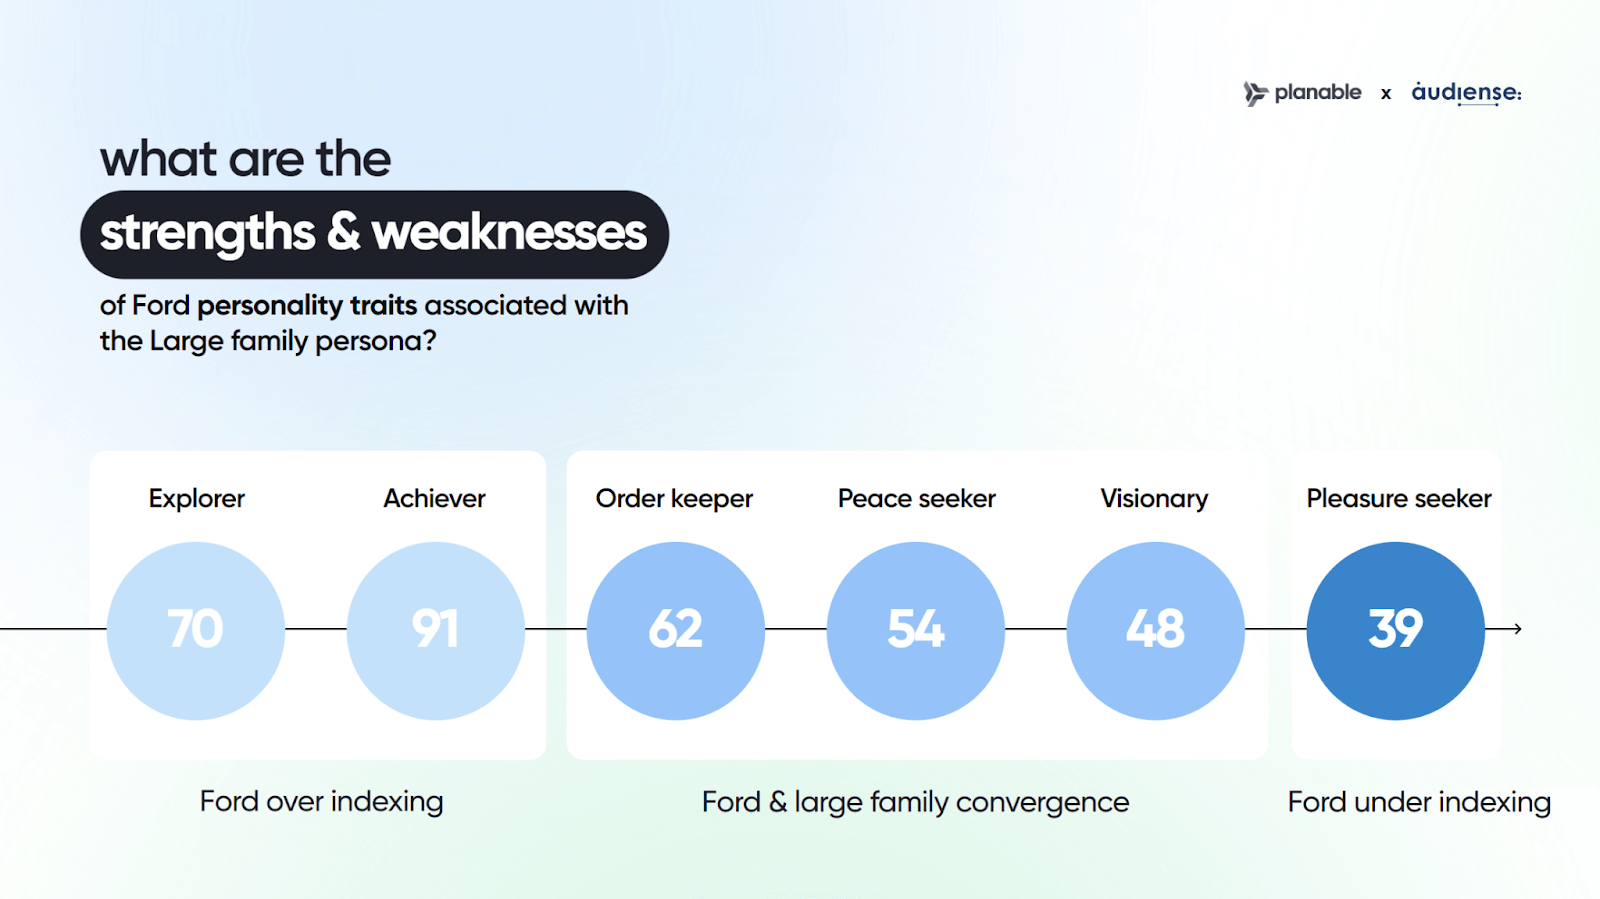 Graph showing strengths and weaknesses of Ford's personality traits for large families, over-indexing in explorer and achiever, under-indexing in pleasure seeker.